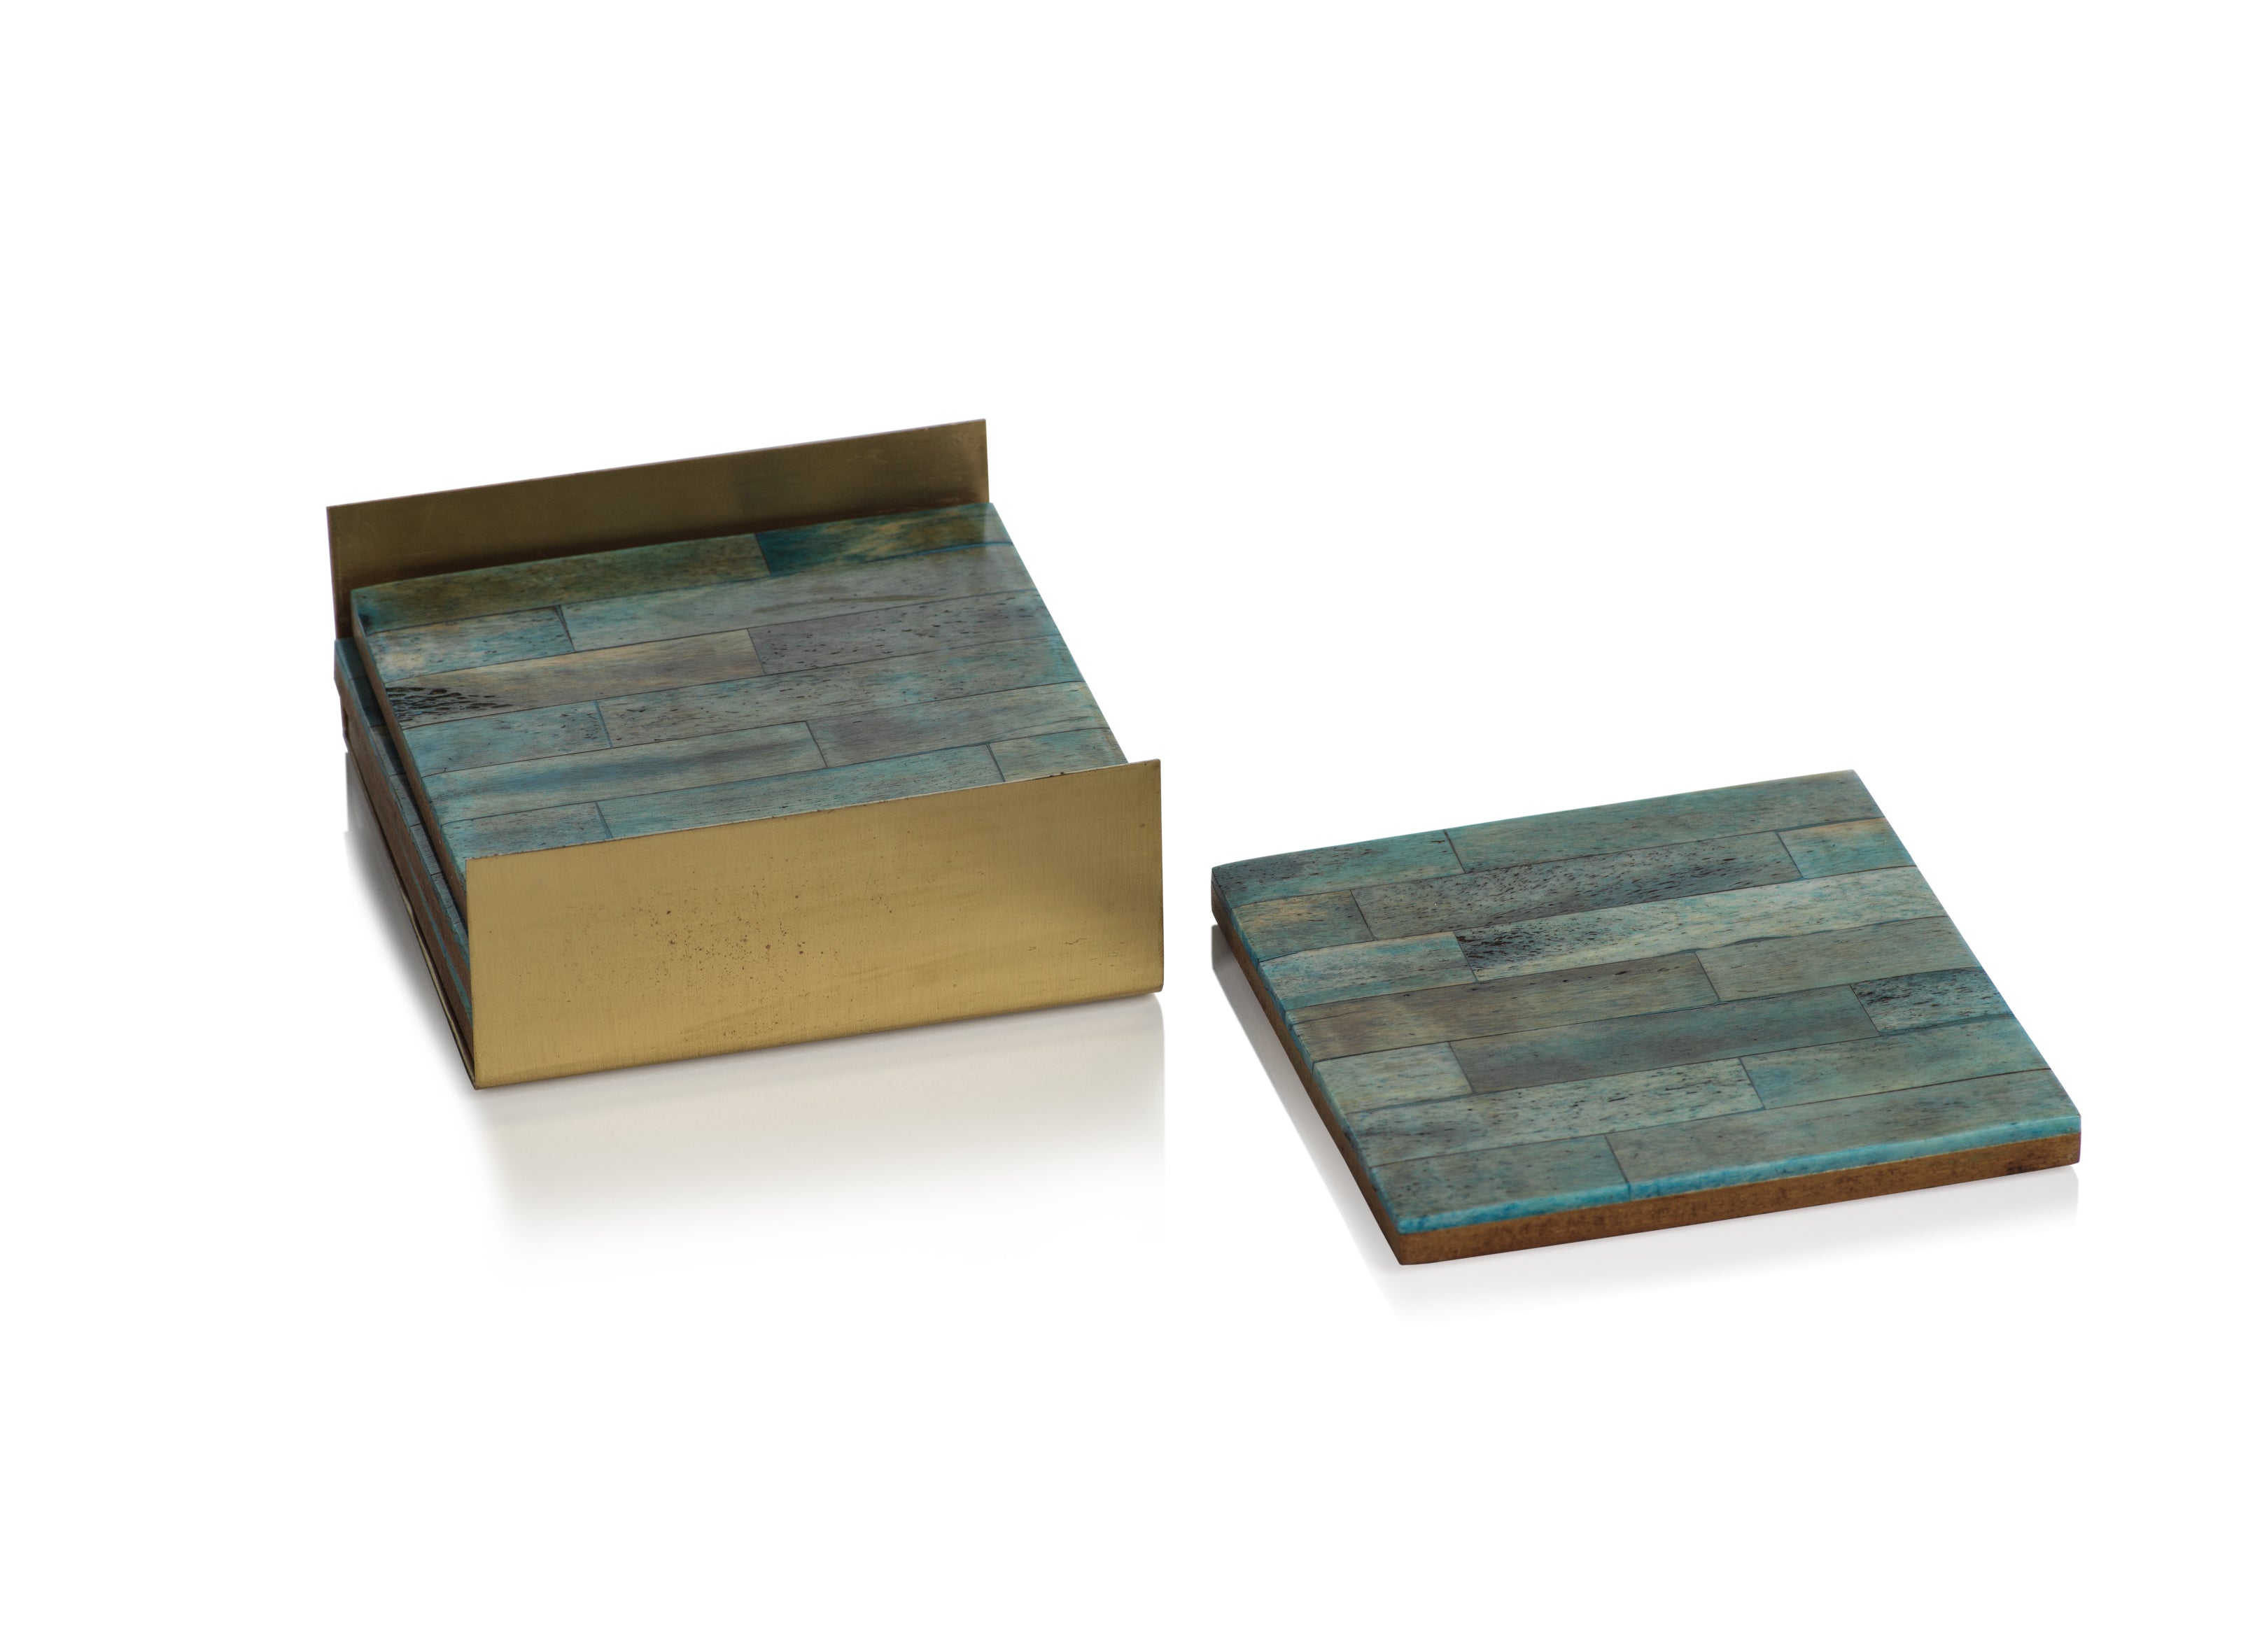 Set of 4 Coasters on Metal Tray - Green/Gold - CARLYLE AVENUE